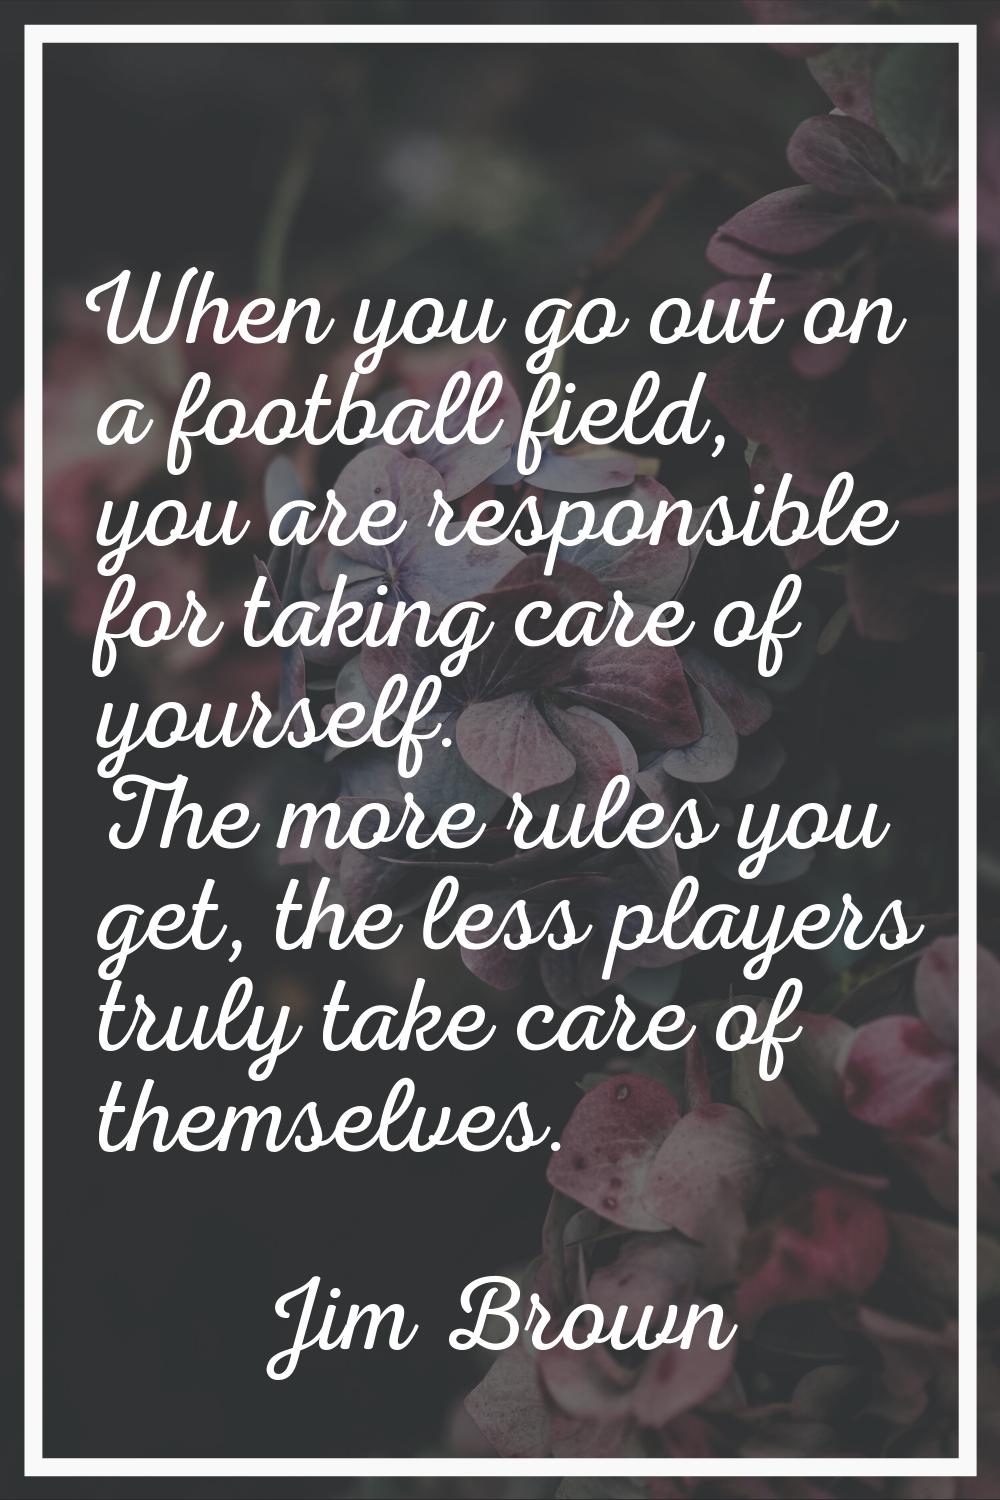 When you go out on a football field, you are responsible for taking care of yourself. The more rule